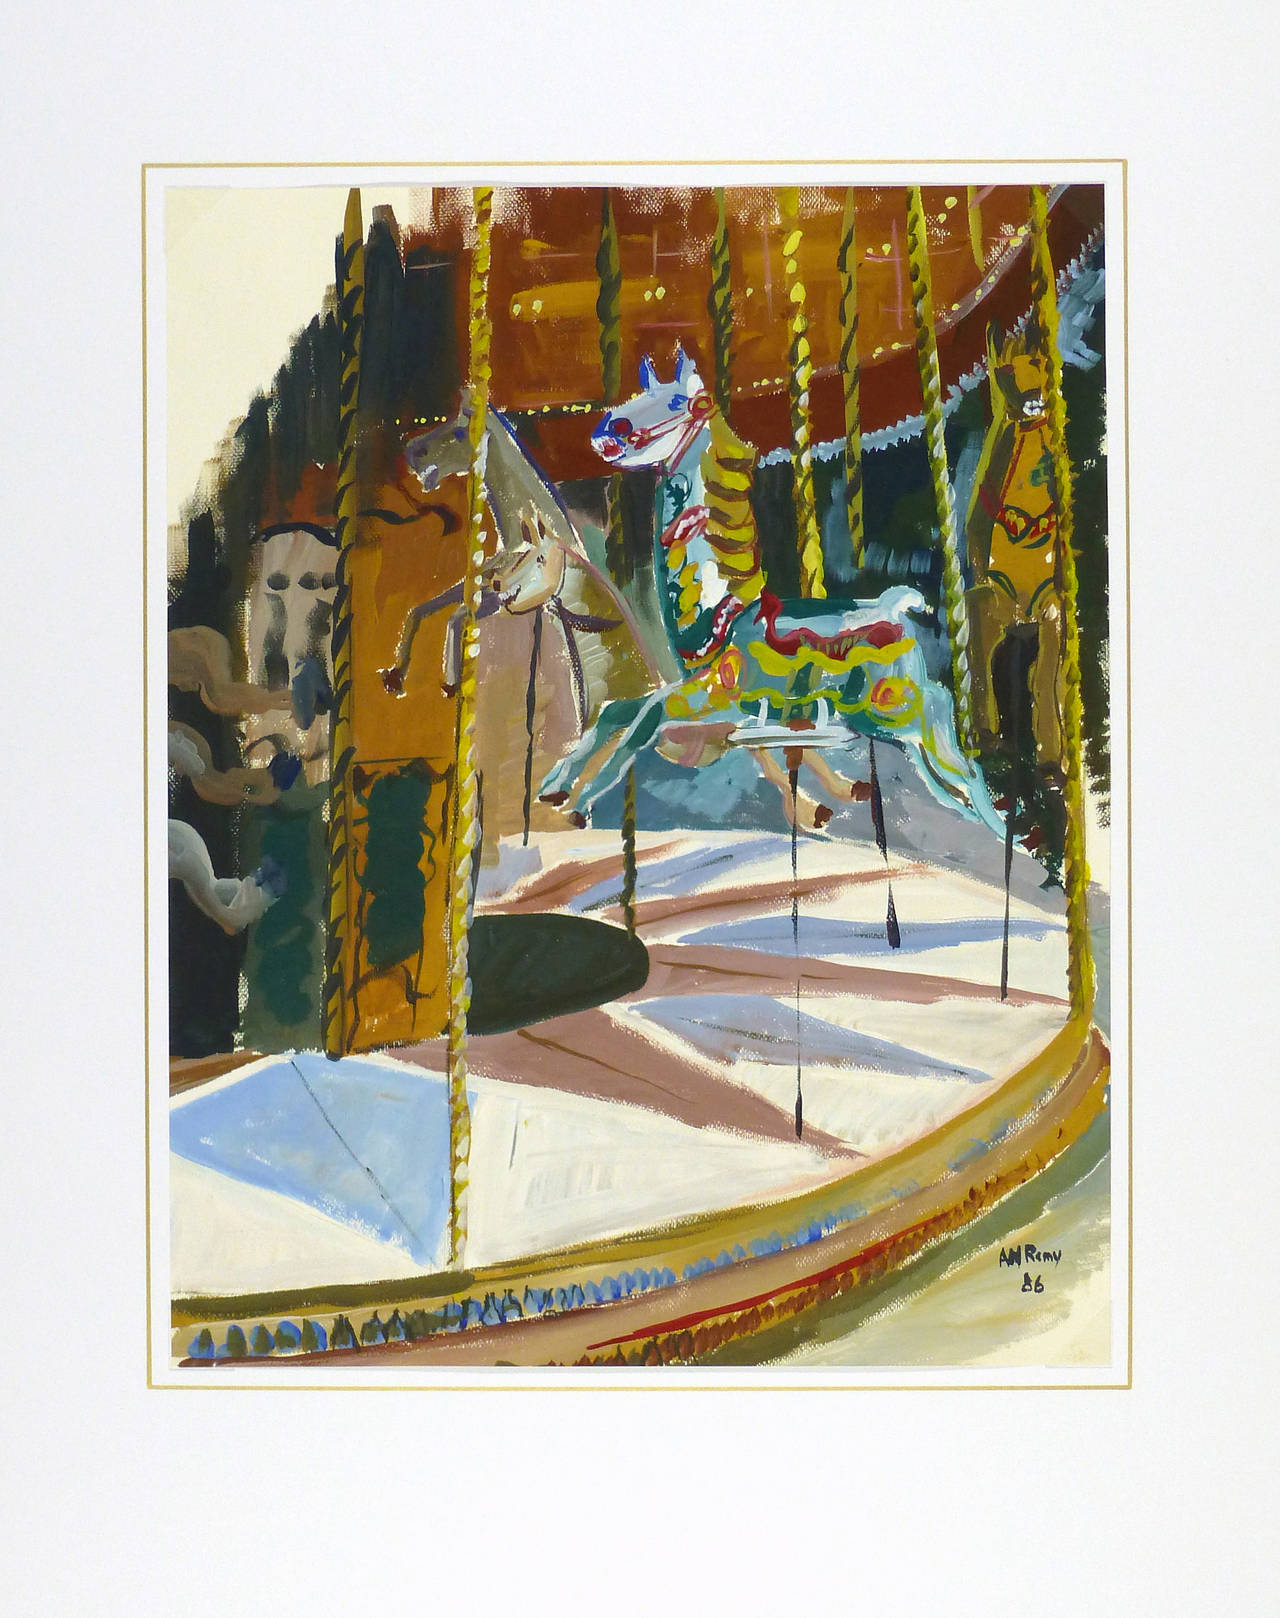 Jovial gouache painting of colorful carousel horses by AM. Rémy, 1986. Signed and dated lower right. 

Original one-of-a-kind artwork on paper displayed on a white mat with a gold border. Mat fits a standard-size frame. Archival plastic sleeve